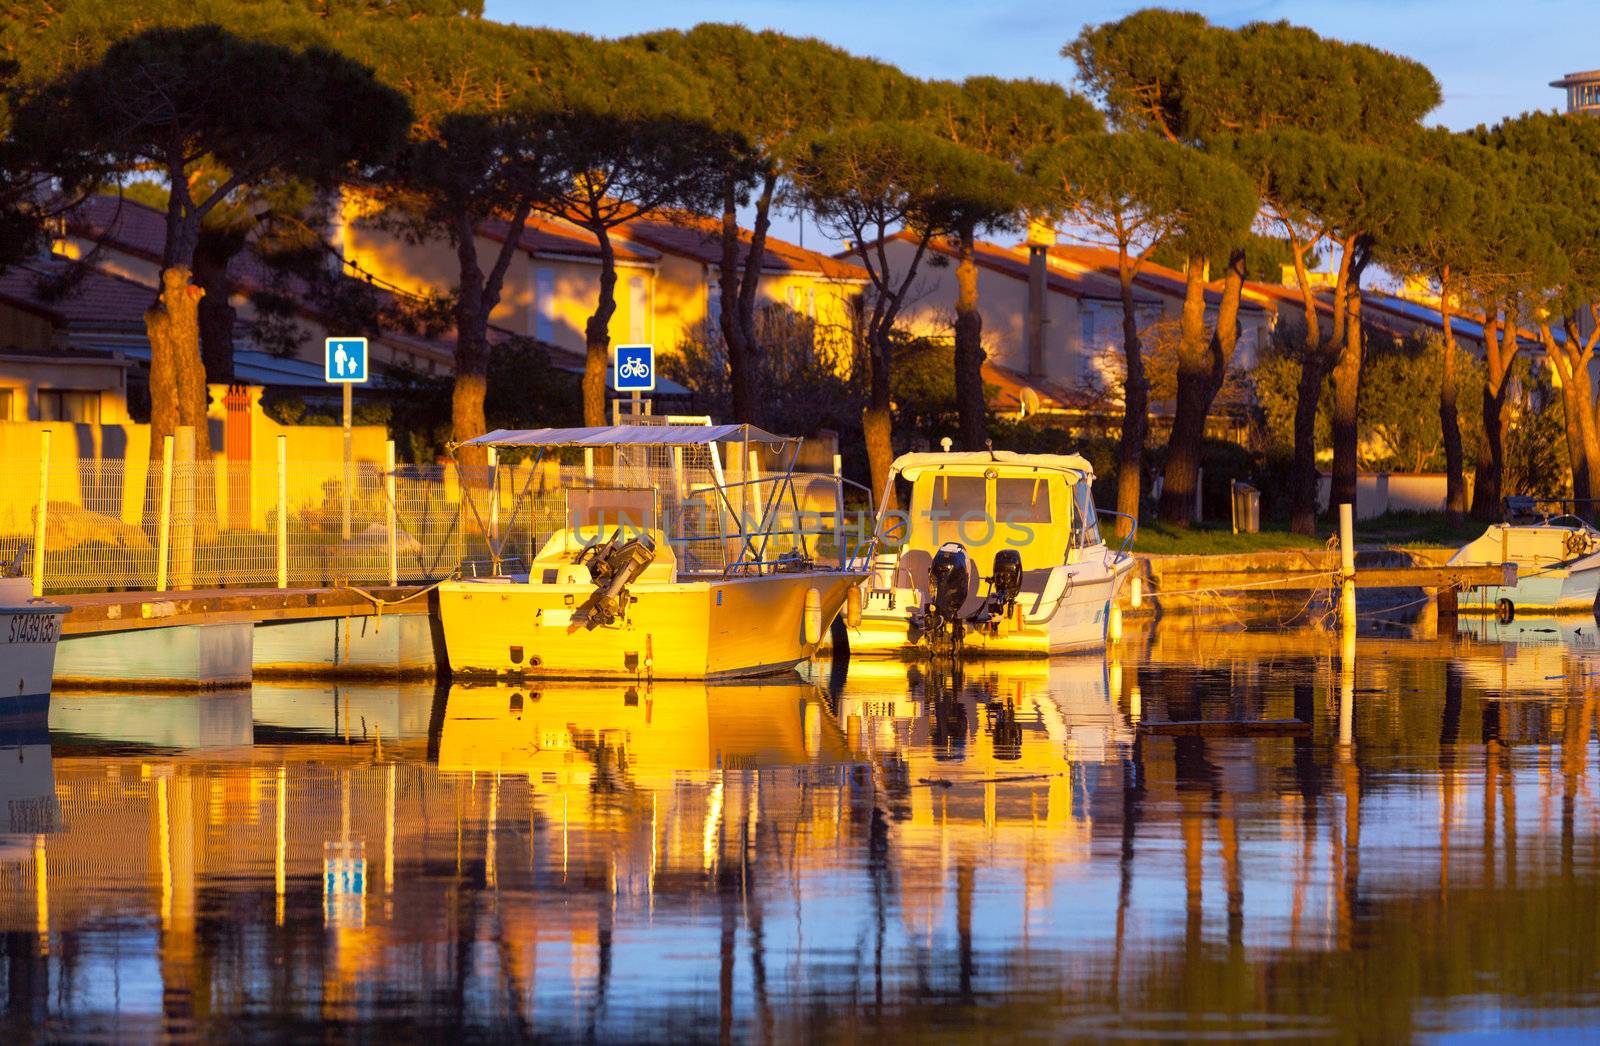 Small fishing and pleasure boats moored in a tranquil marina at sunset reflected in the golden glow of the sun